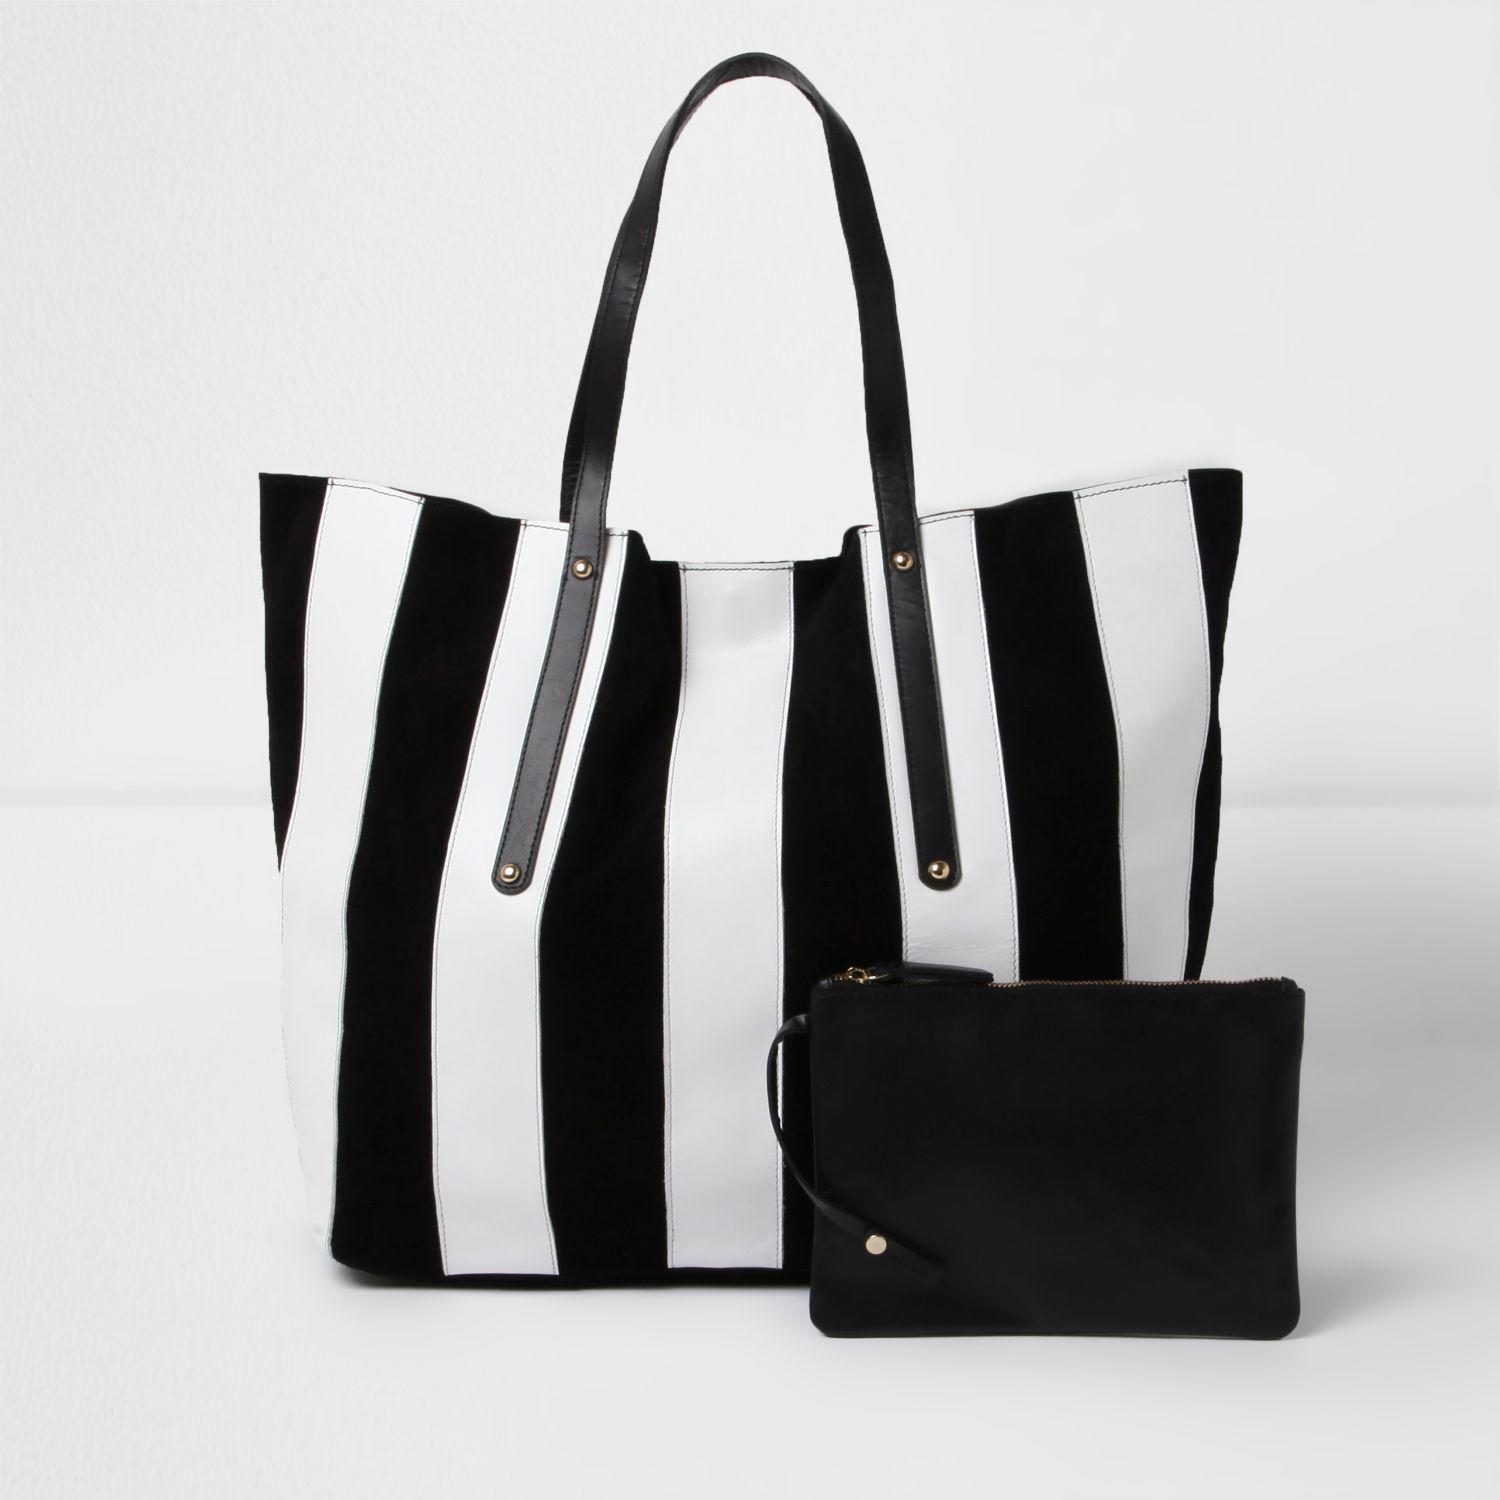 River Island Black And White Stripe Leather Tote Bag - Lyst